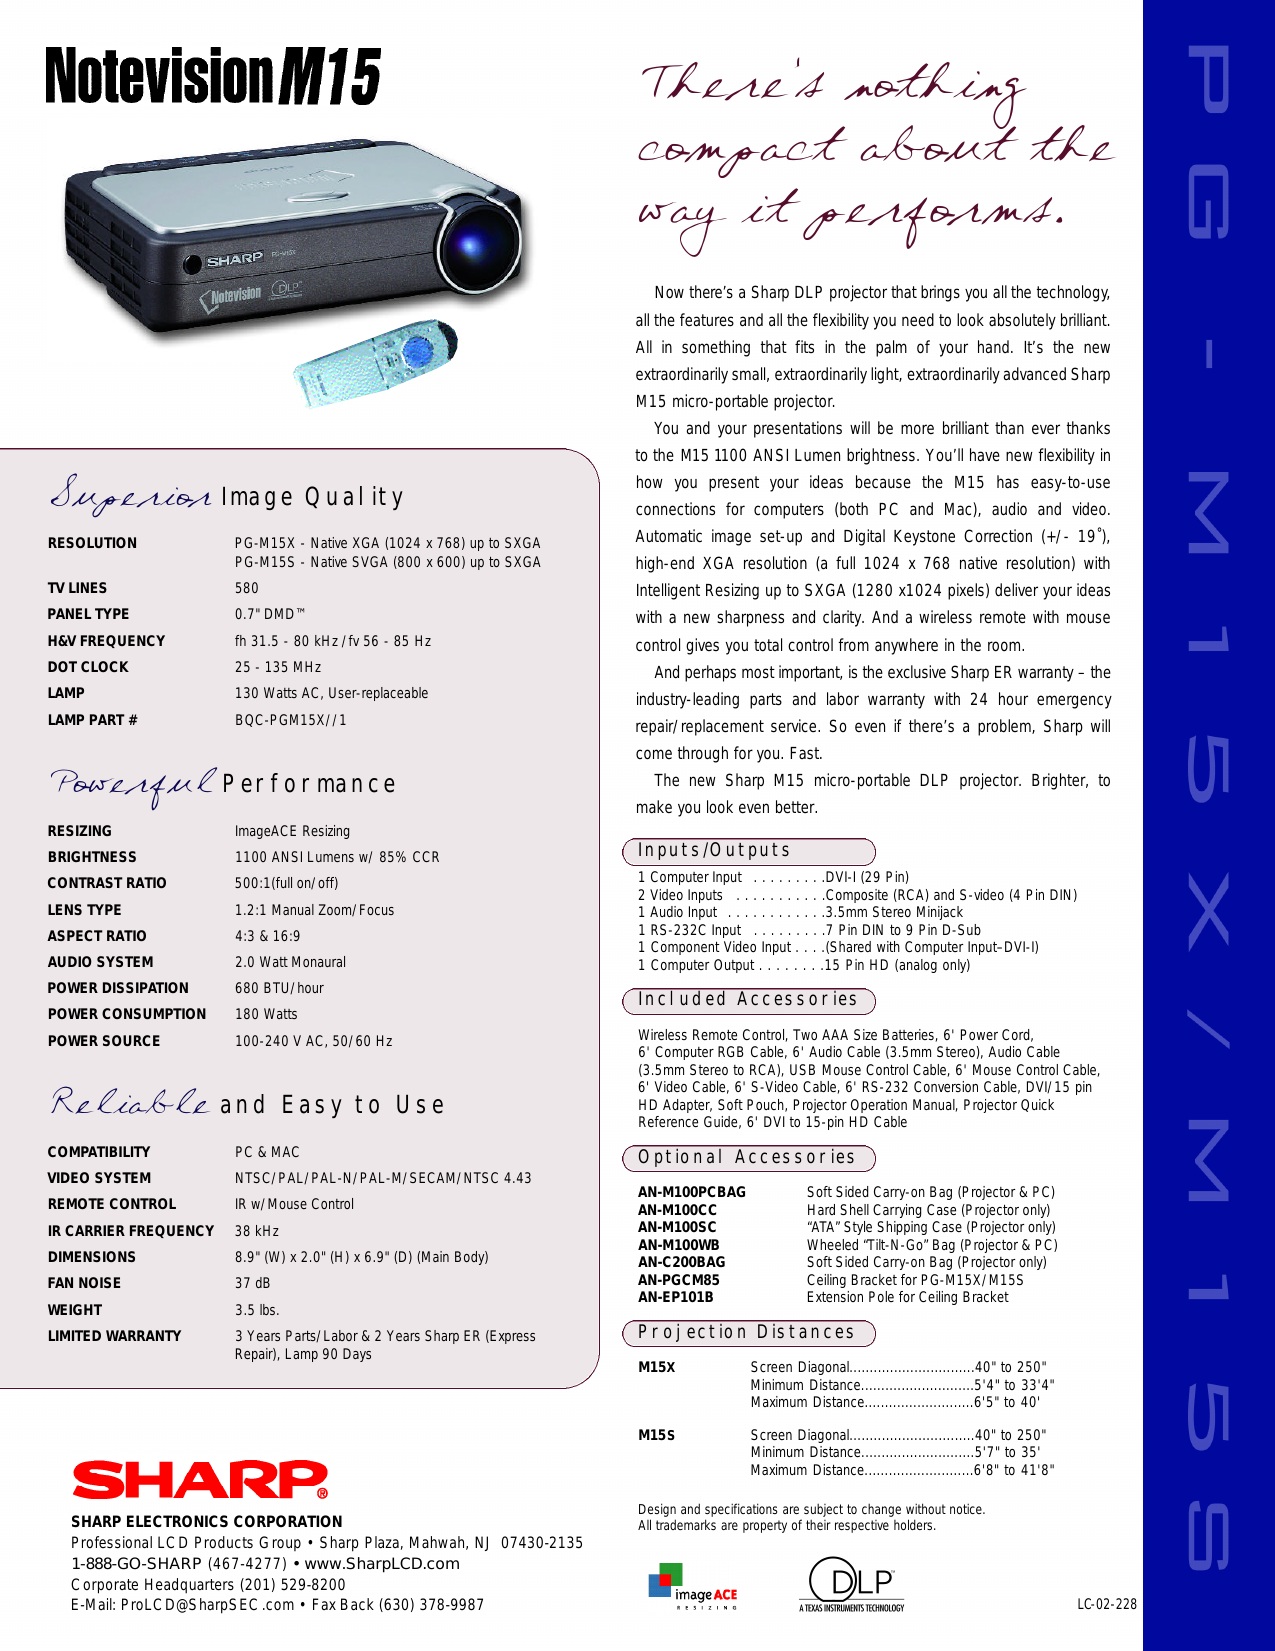 Page 2 of 2 - Sharp M15 SHA085_M15_specsheet User Manual  To The 8d58f5bc-5247-4483-b92d-15fc1eec1c64